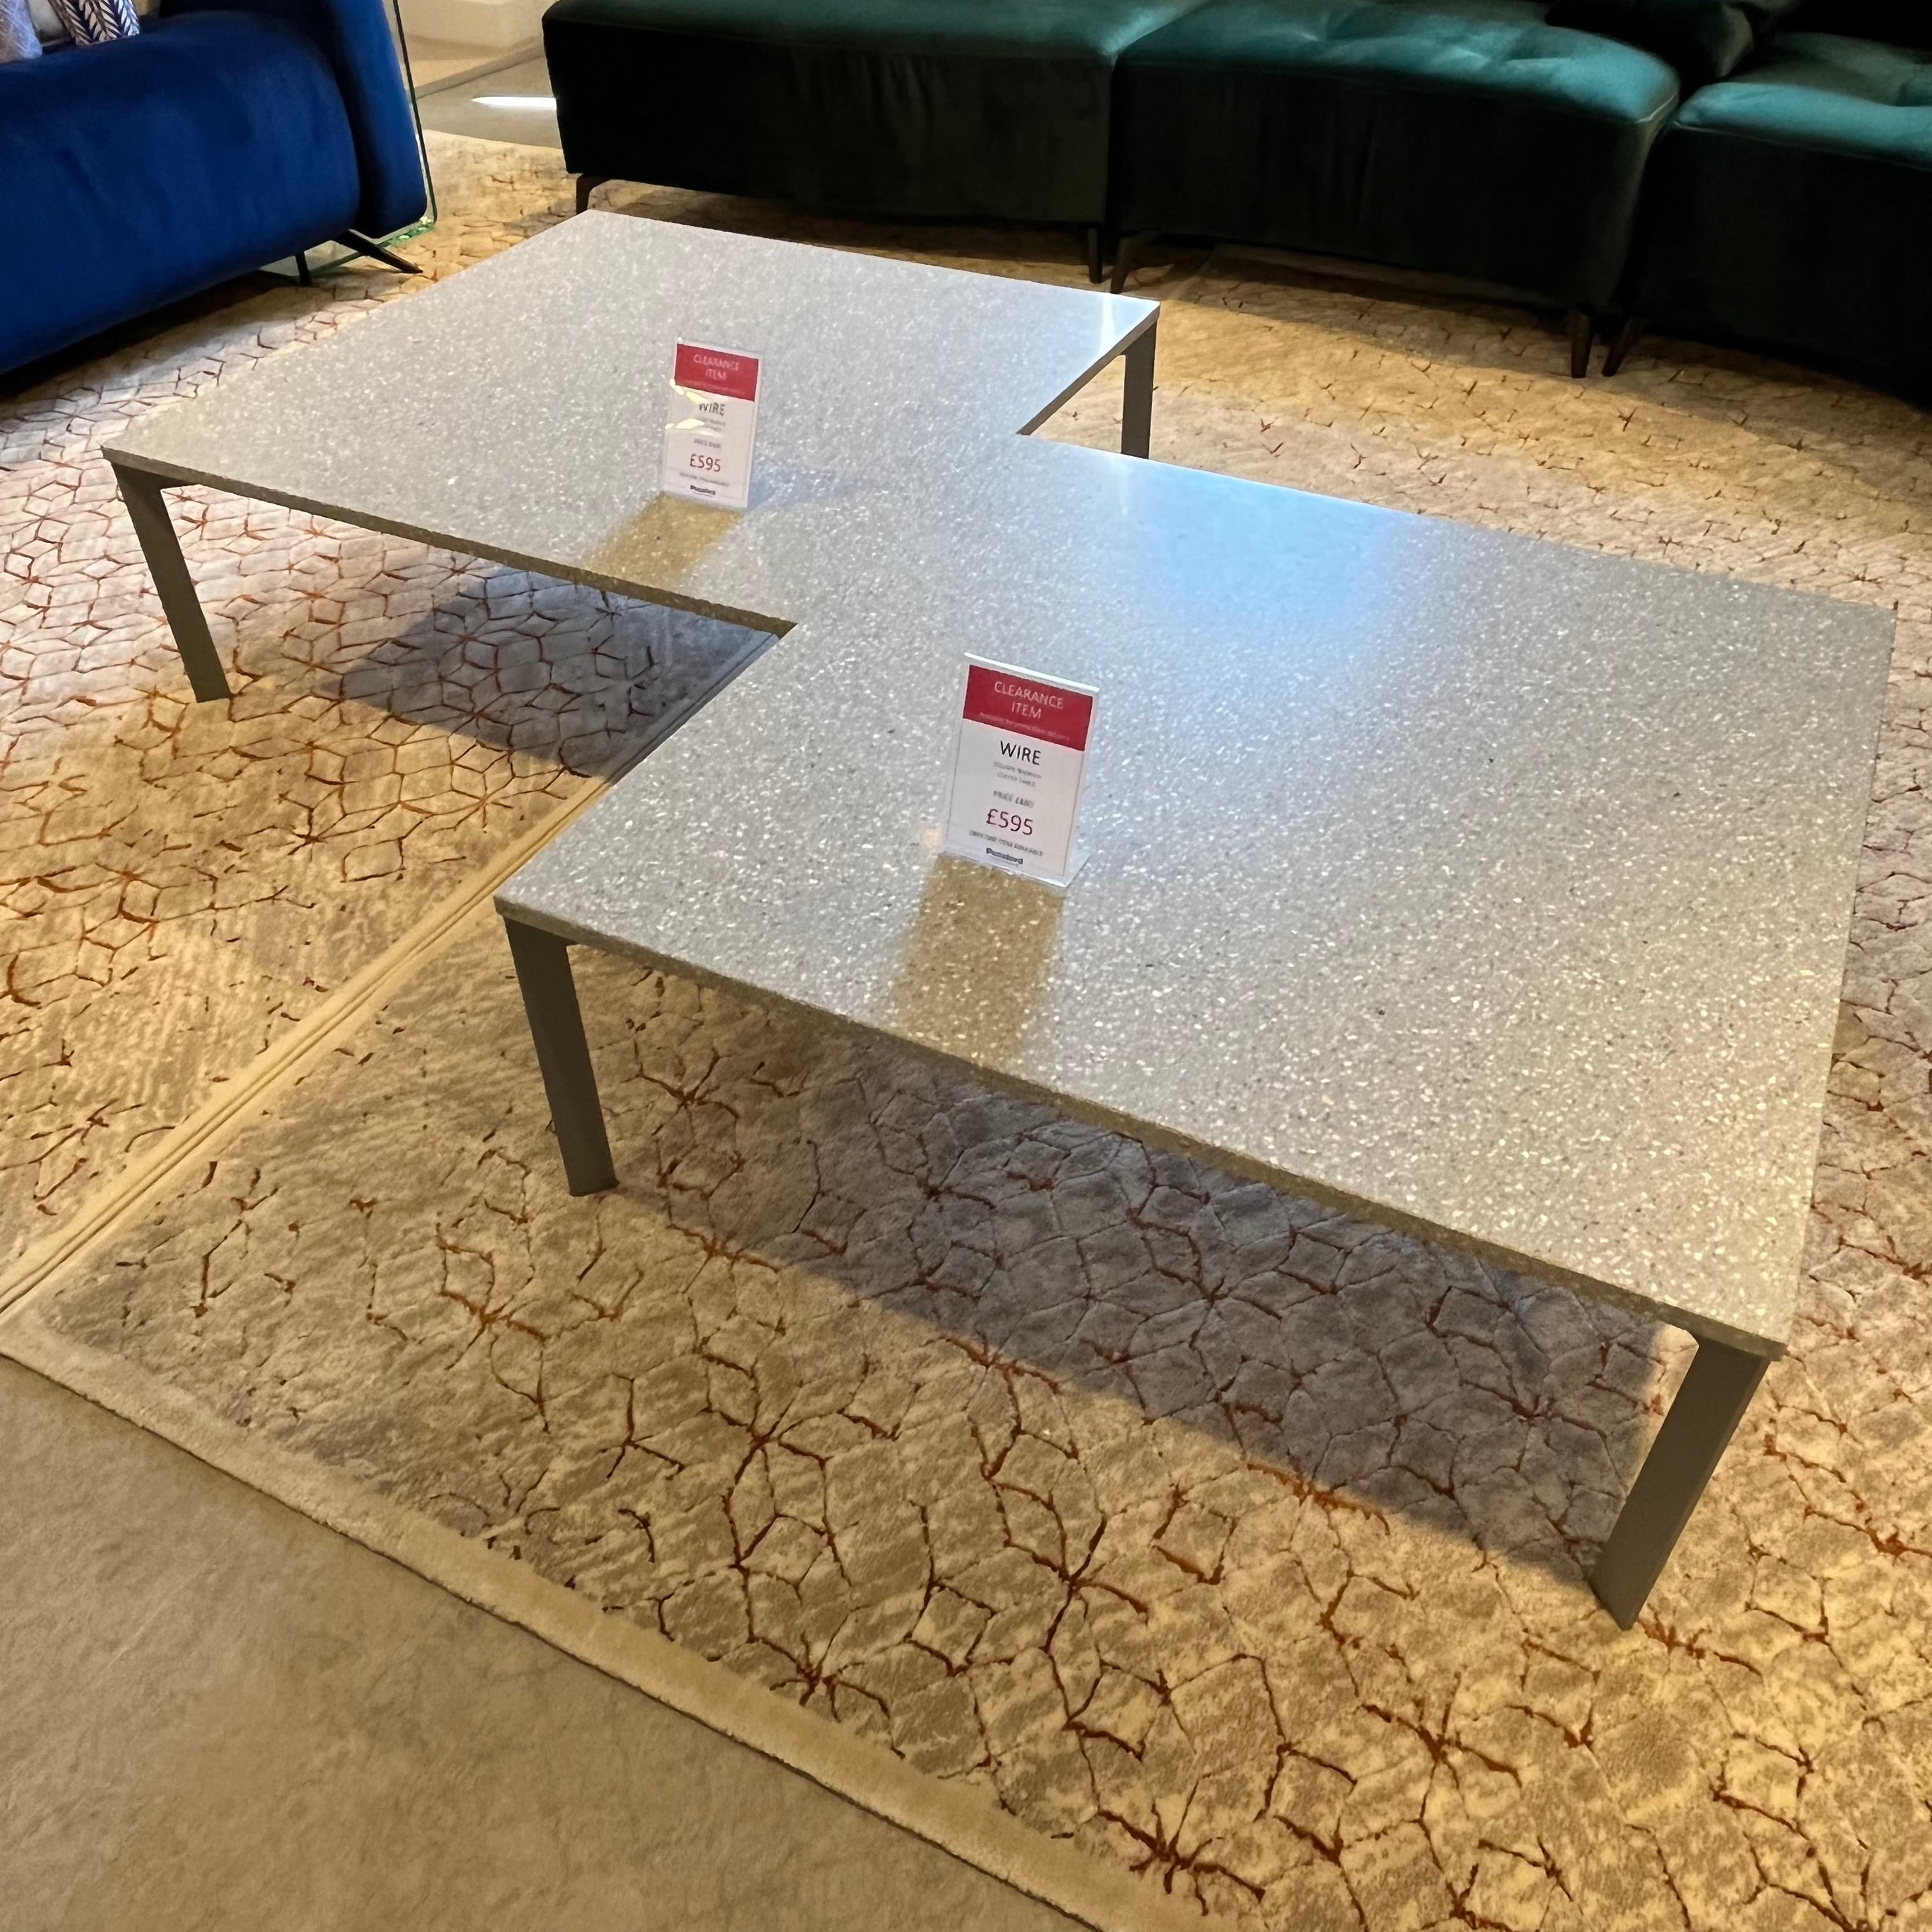 WIRE Coffee Table